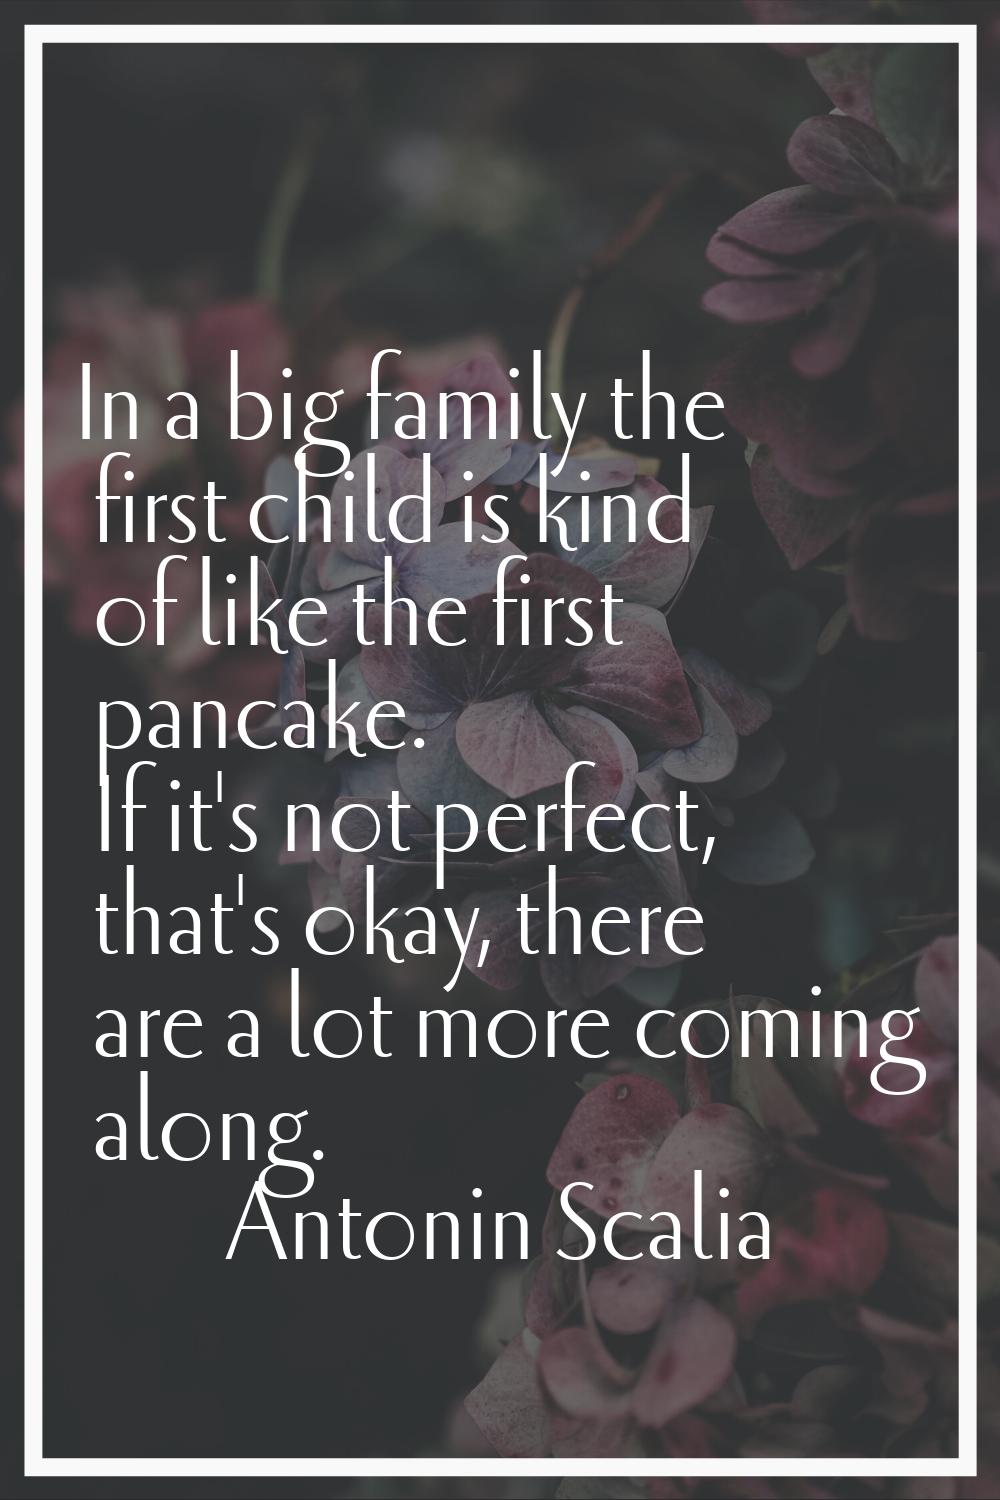 In a big family the first child is kind of like the first pancake. If it's not perfect, that's okay